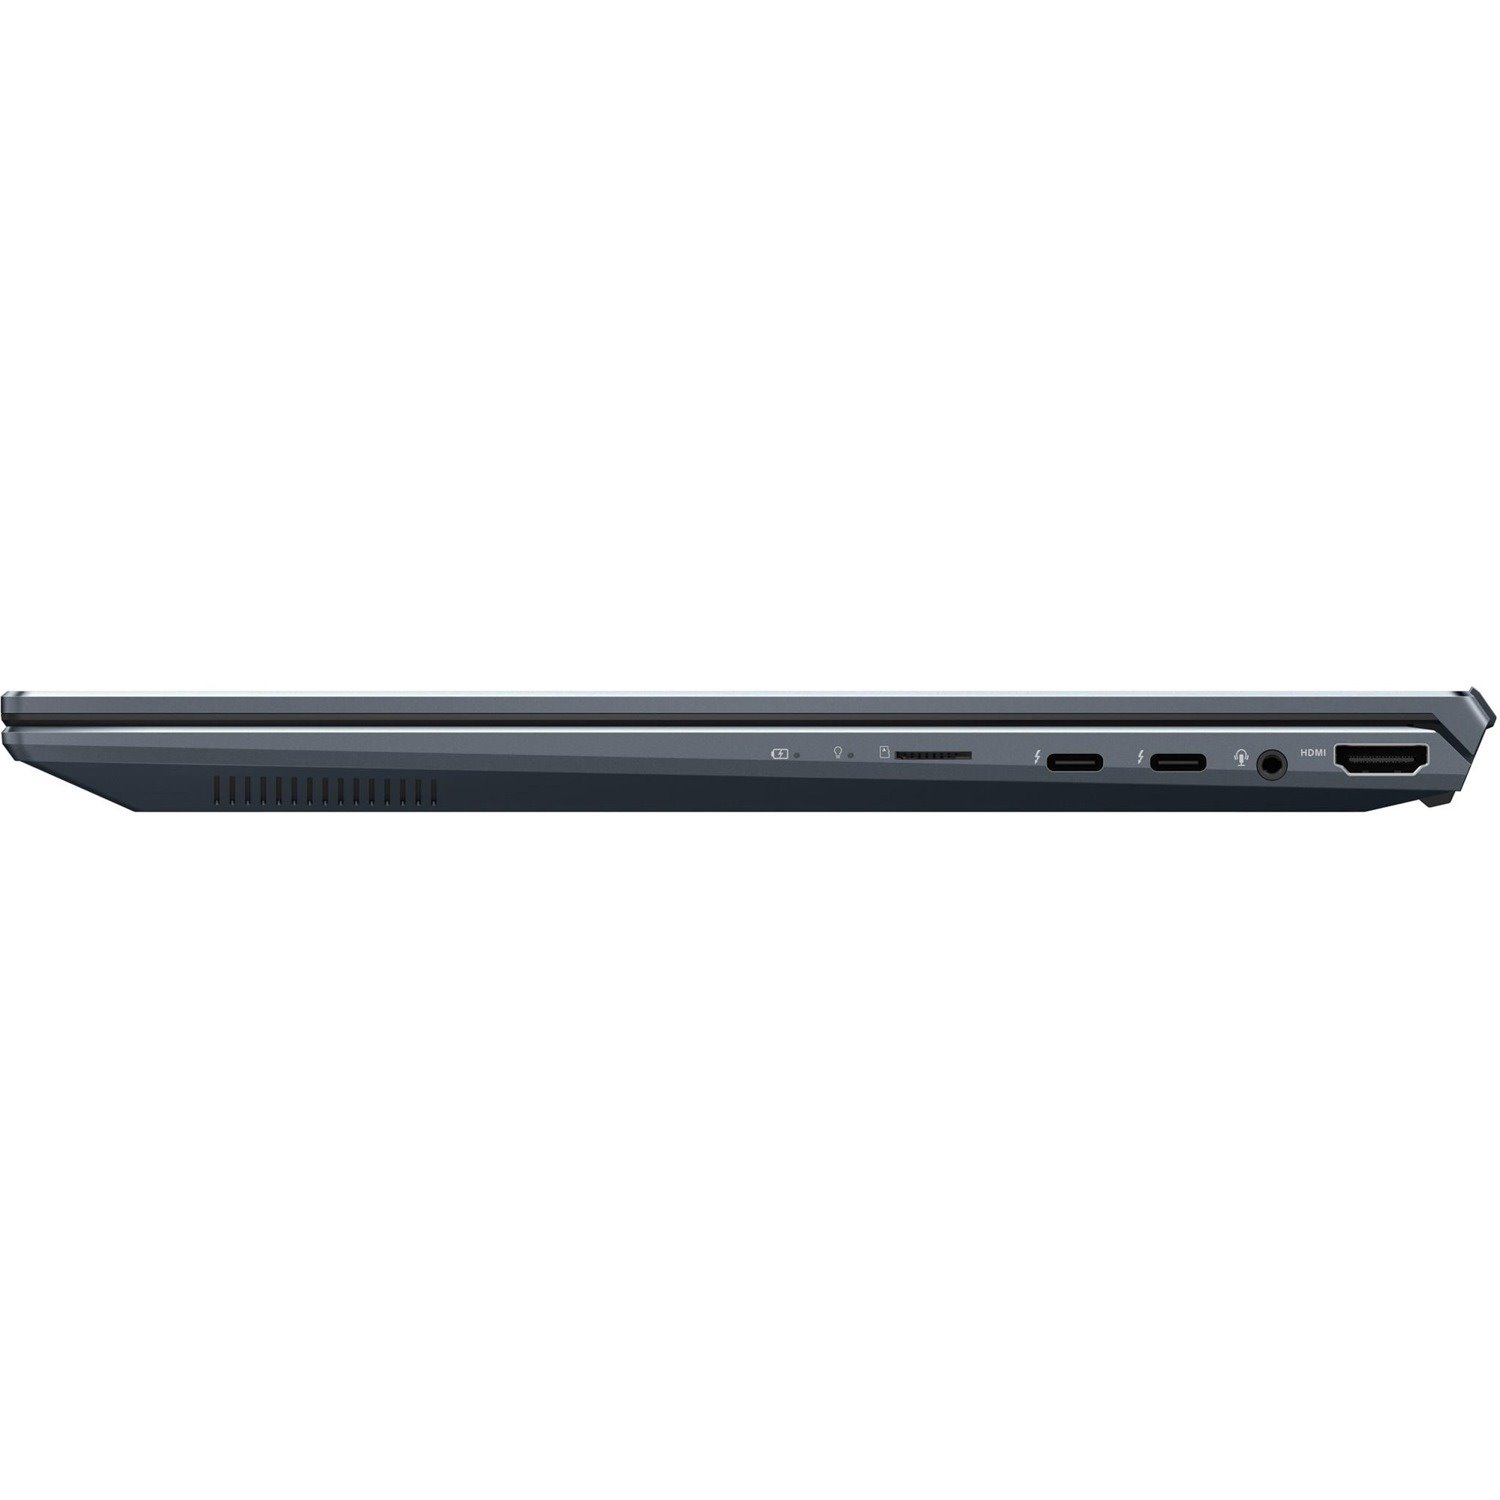 Asus Zenbook 14X OLED UX5400 UX5400ZF-PB76T 14" Touchscreen Notebook - 2.8K - 2880 x 1800 - Intel Core i7 12th Gen i7-1260P Dodeca-core (12 Core) 2.10 GHz - 16 GB Total RAM - 16 GB On-board Memory - 1 TB SSD